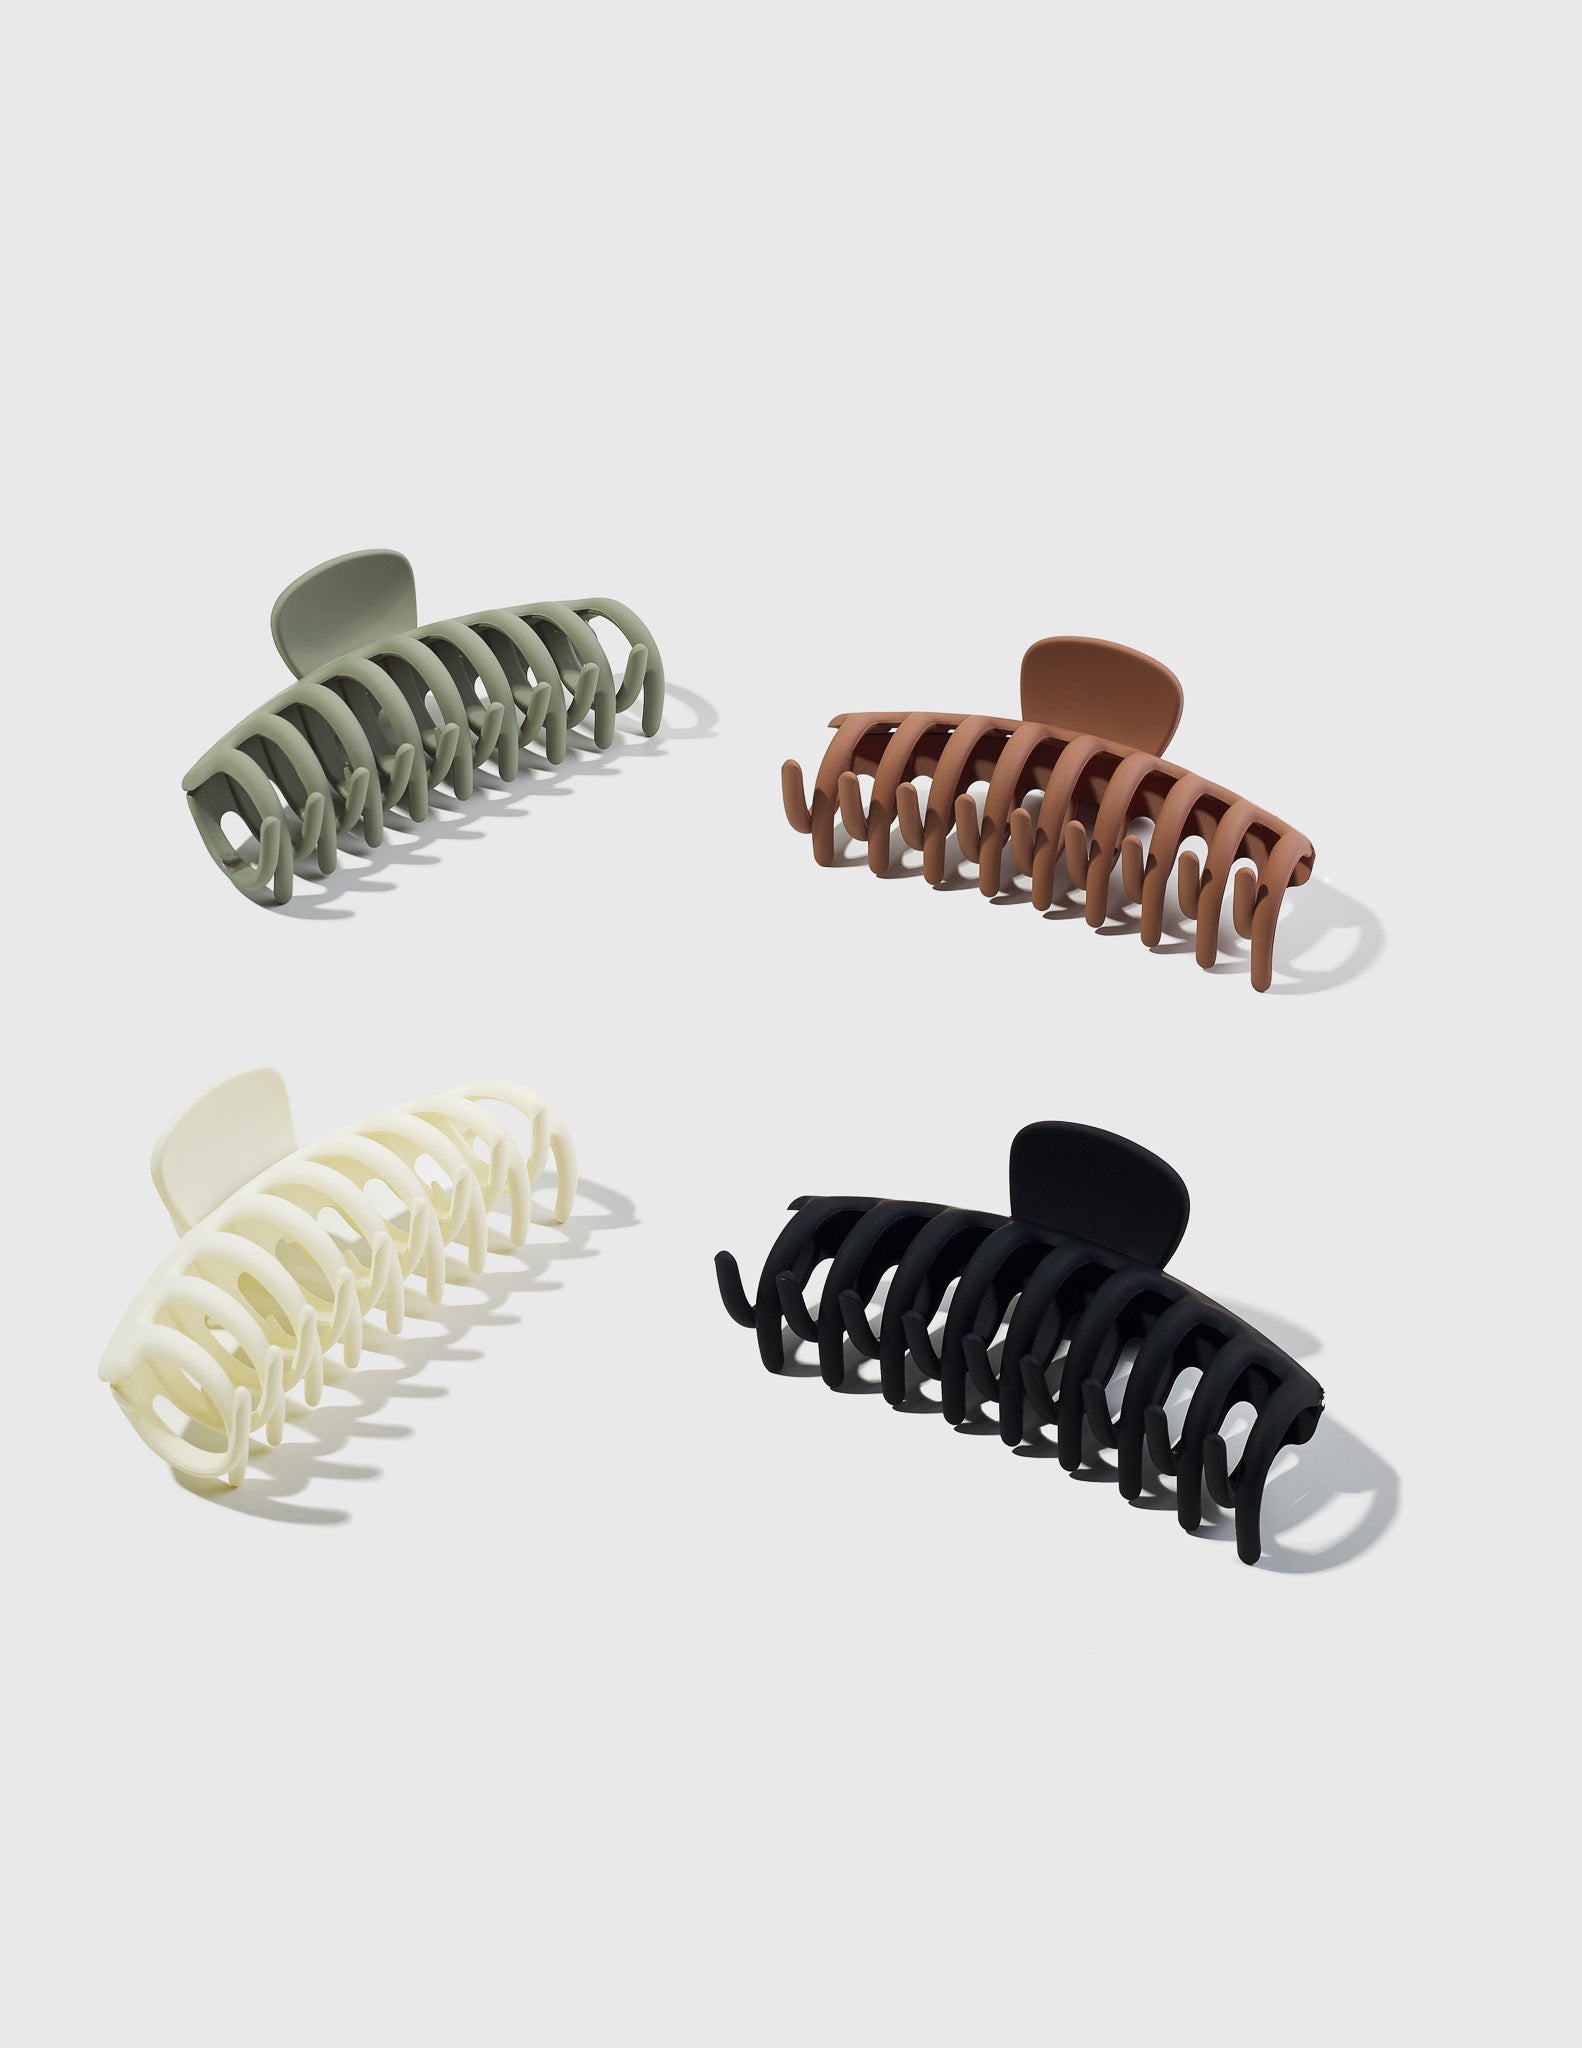 Claw Clips - Neutral